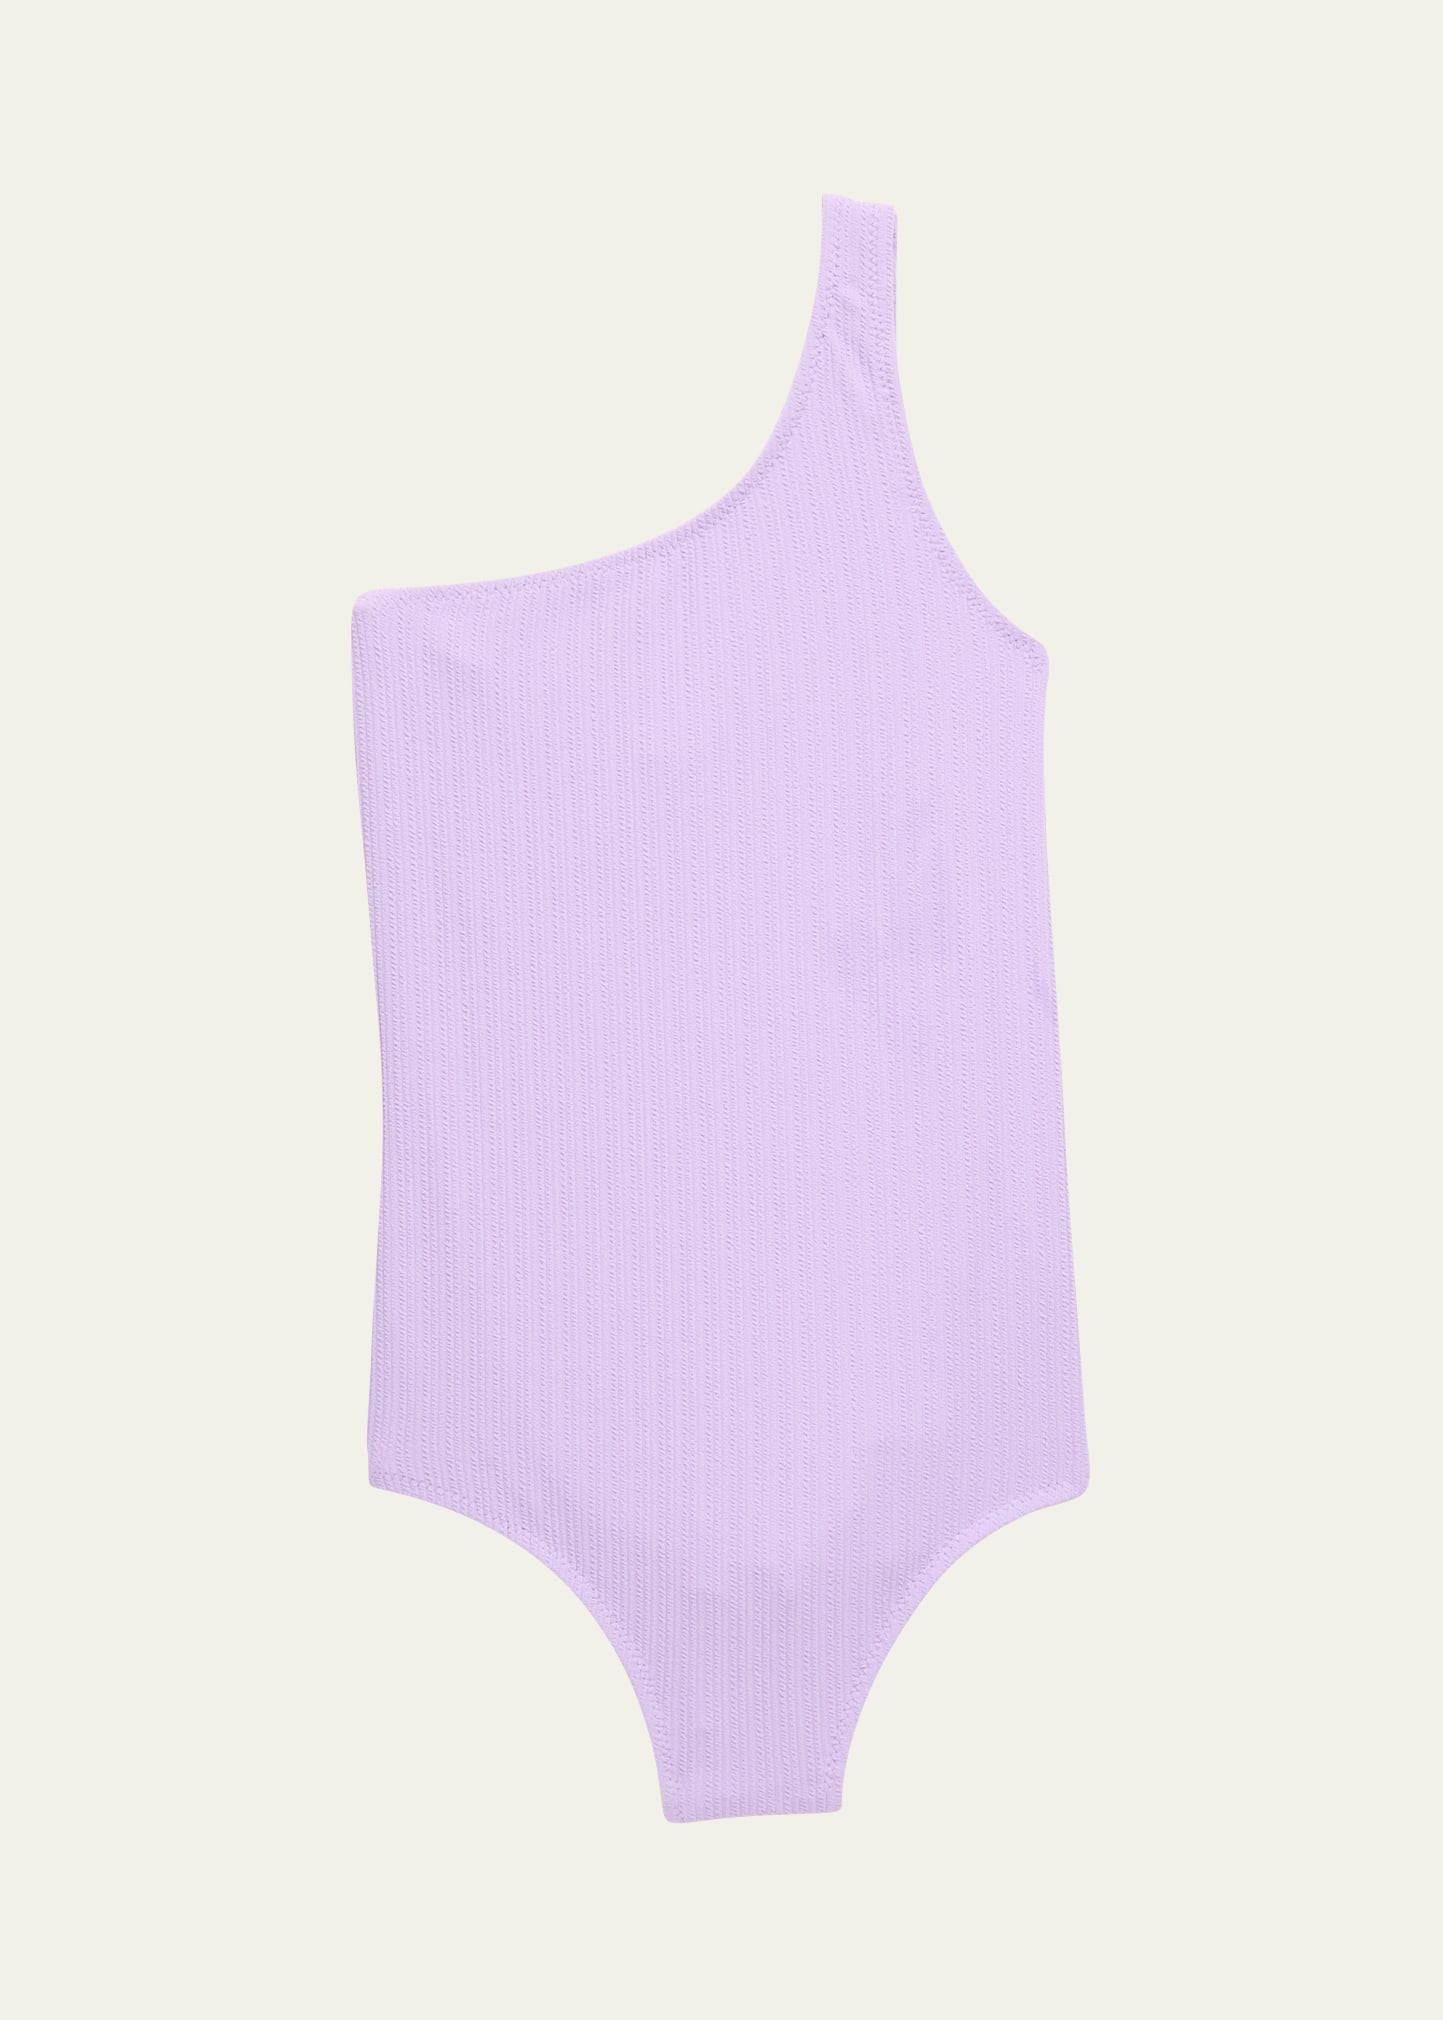 Girl's Nai One-Shoulder Swimsuit